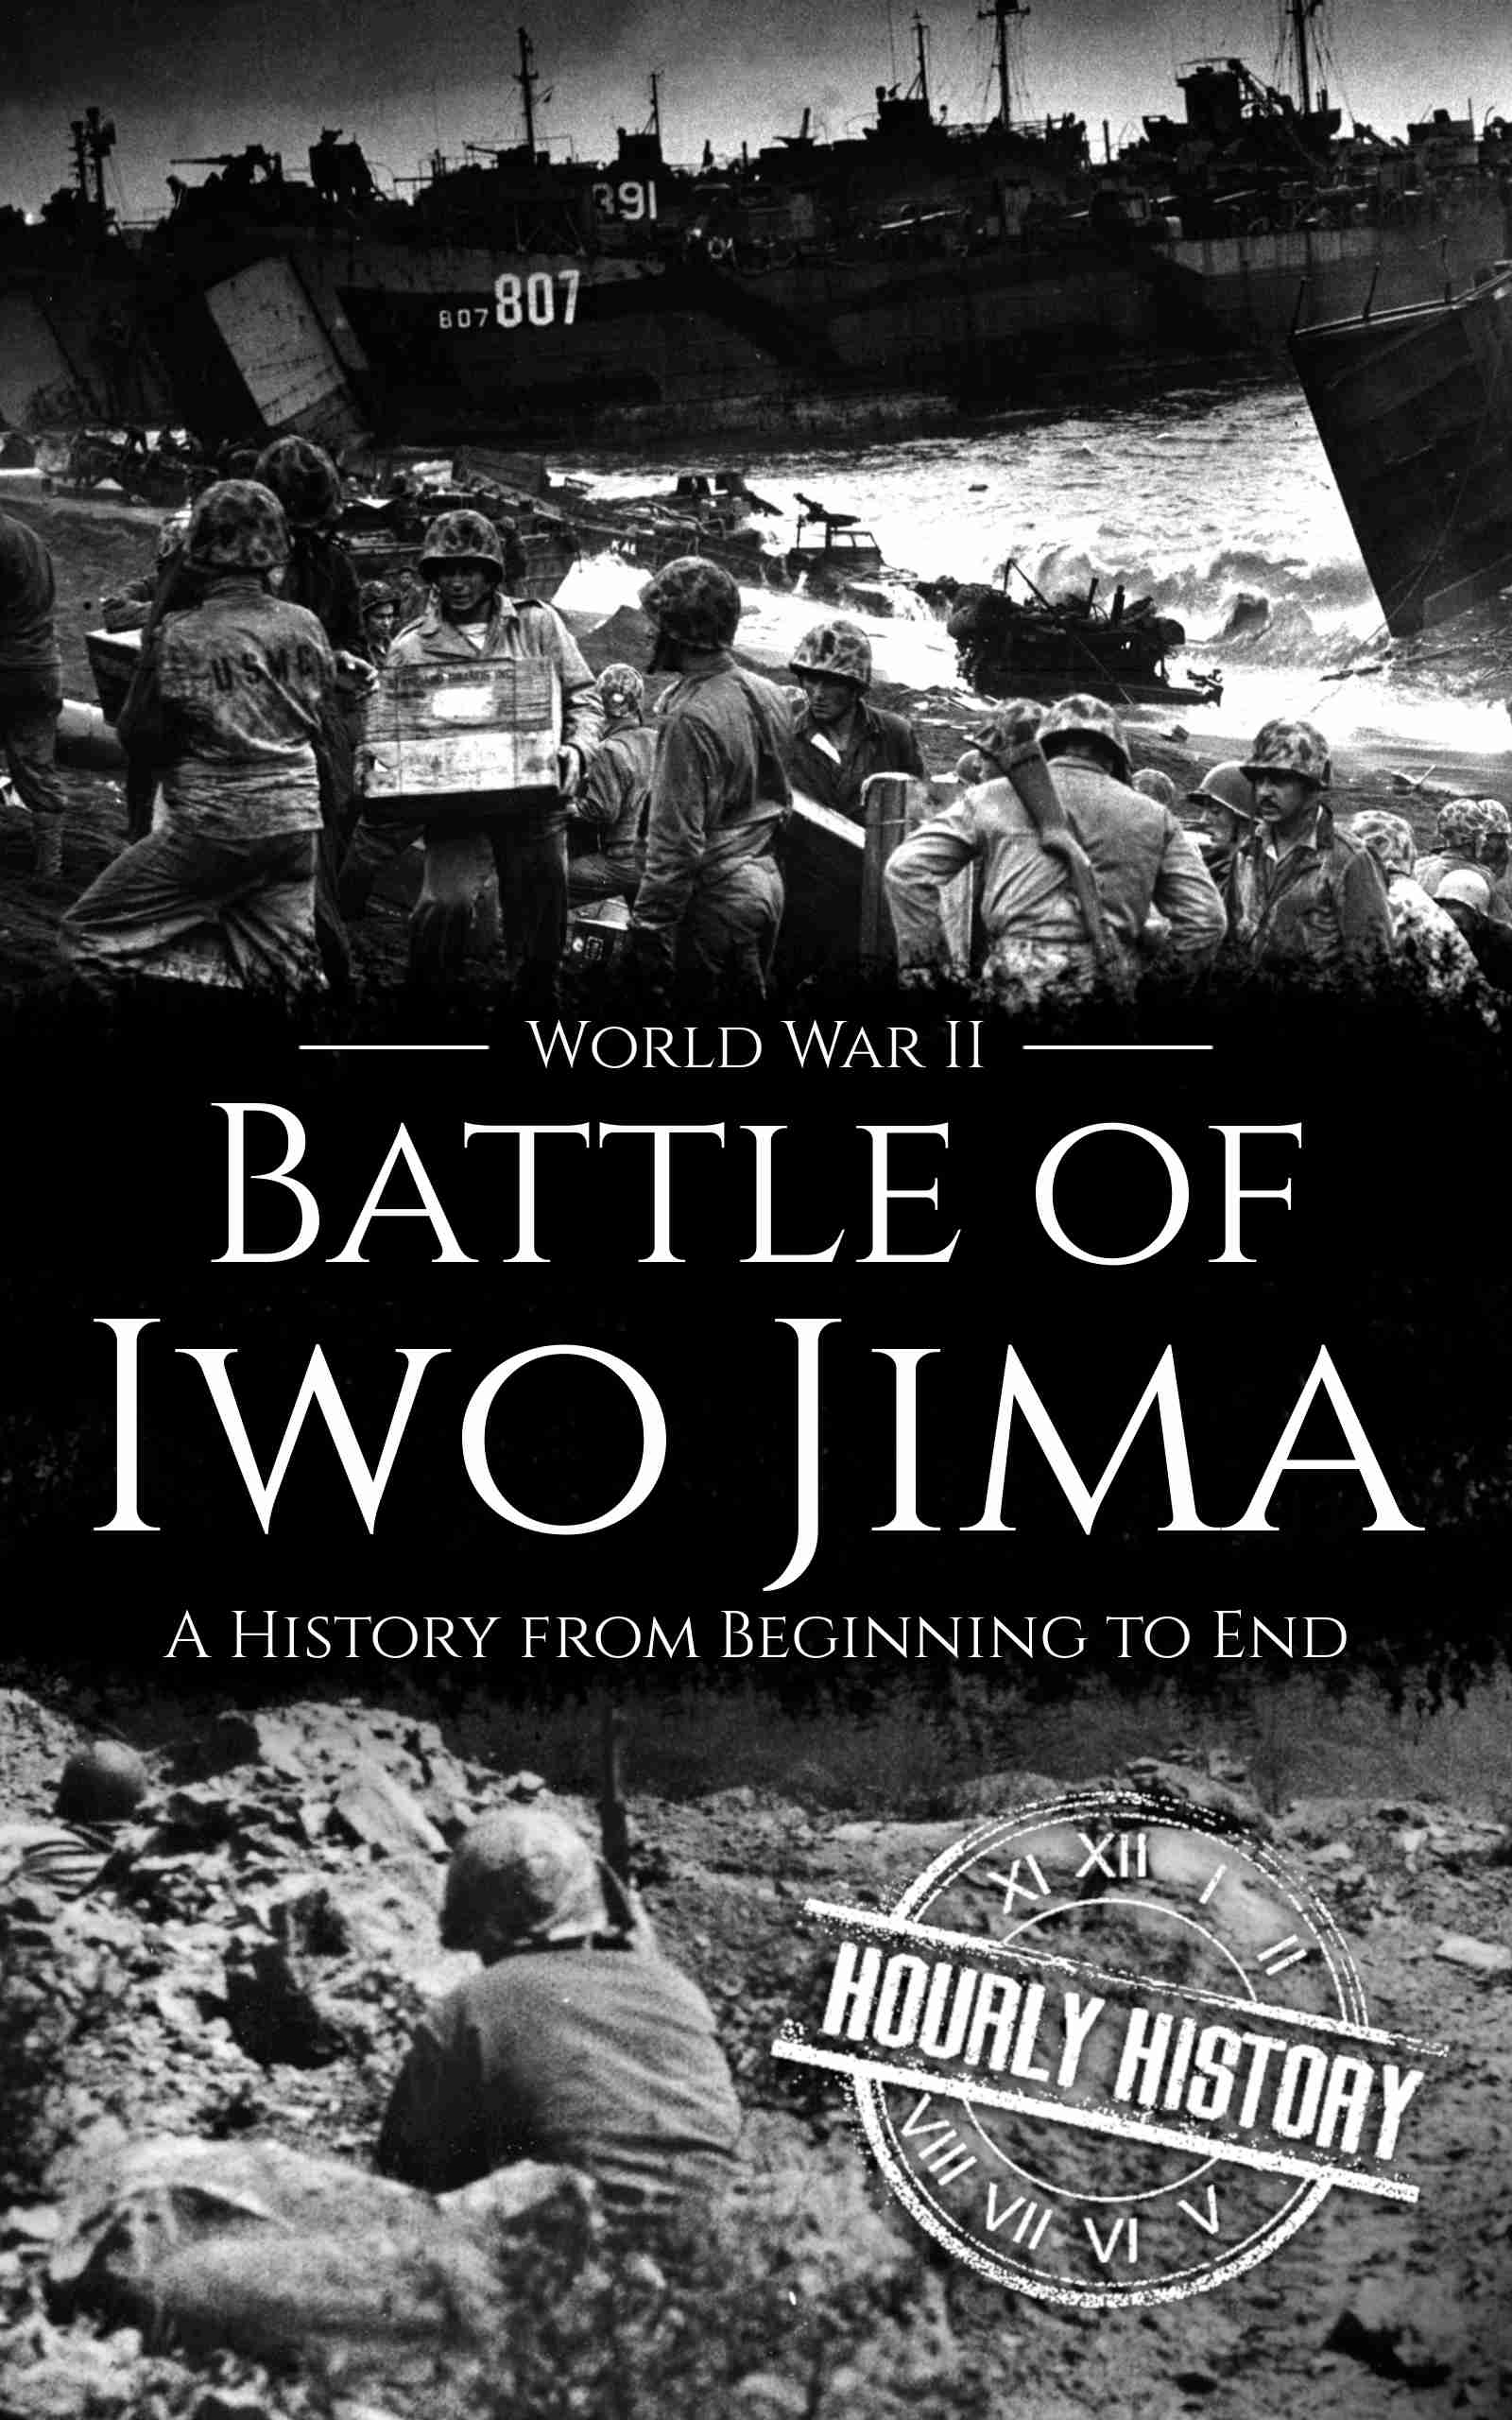 Book cover for Battle of Iwo Jima